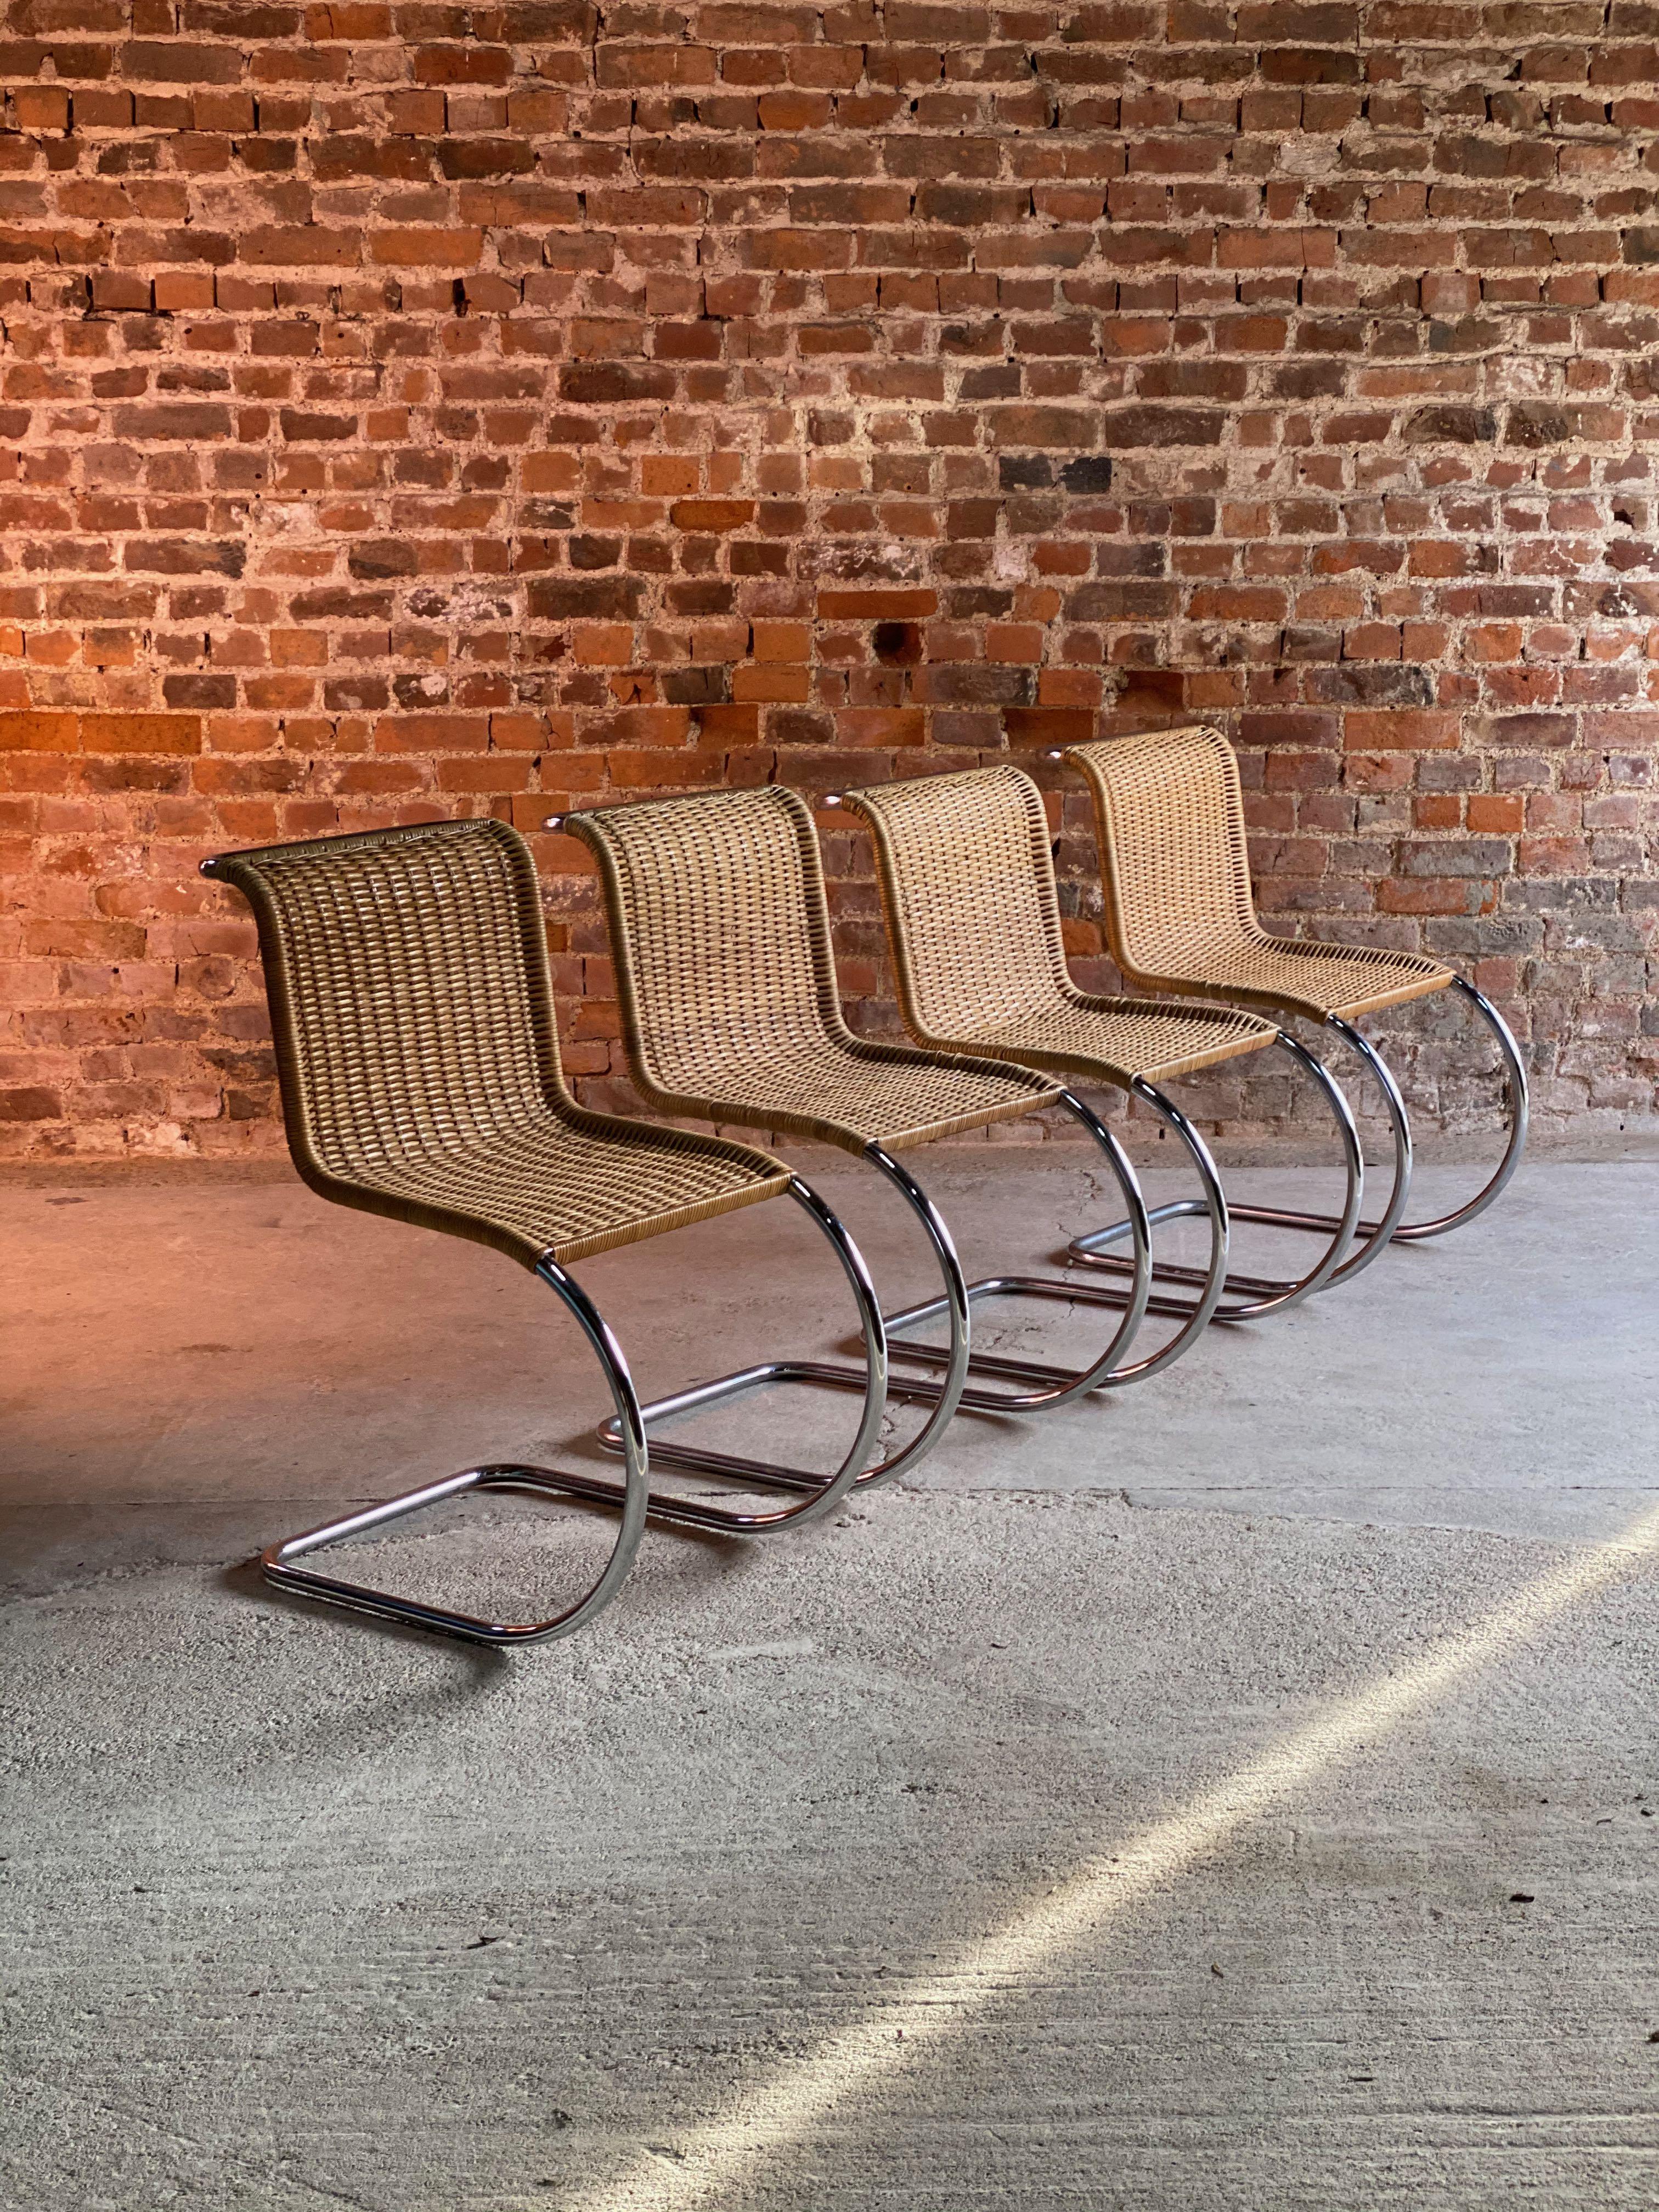 Mies van der Rohe MR10 rattan cantilever chairs set of four by Knoll Original, circa 1970

MR10 rattan and chrome cantilever dining chairs by Ludwig Mies van der Rohe for Knoll, circa 1970s. A rare opportunity to find a matching set of four iconic